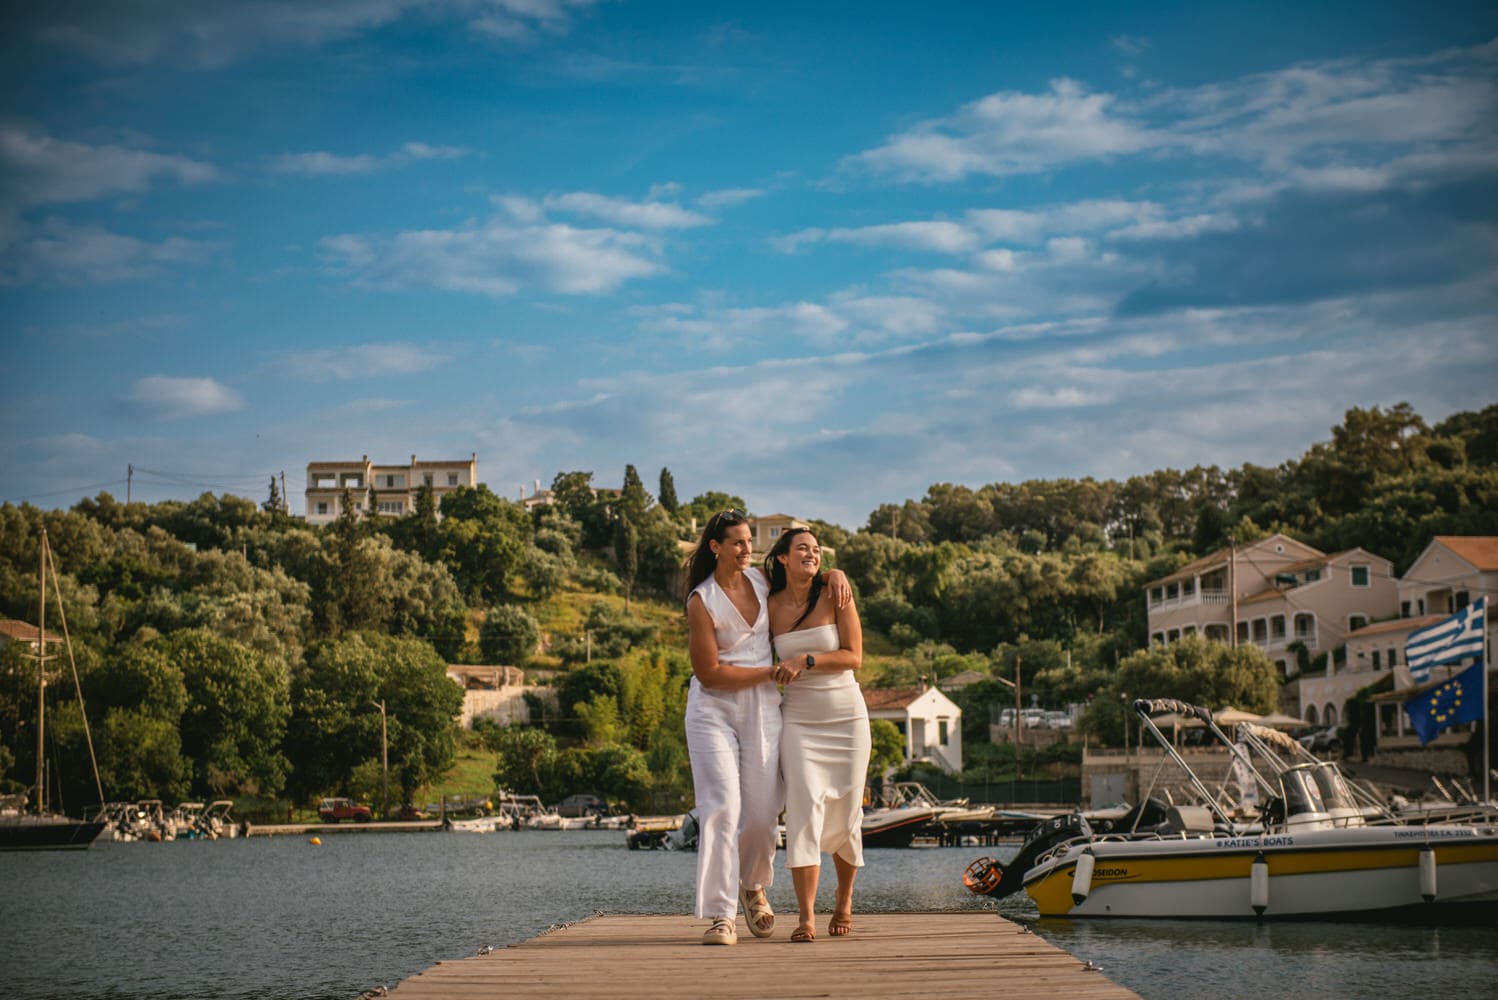 Coastal whispers: Brides walk along the shore, love's secrets carried by the waves during their Corfu elopement.